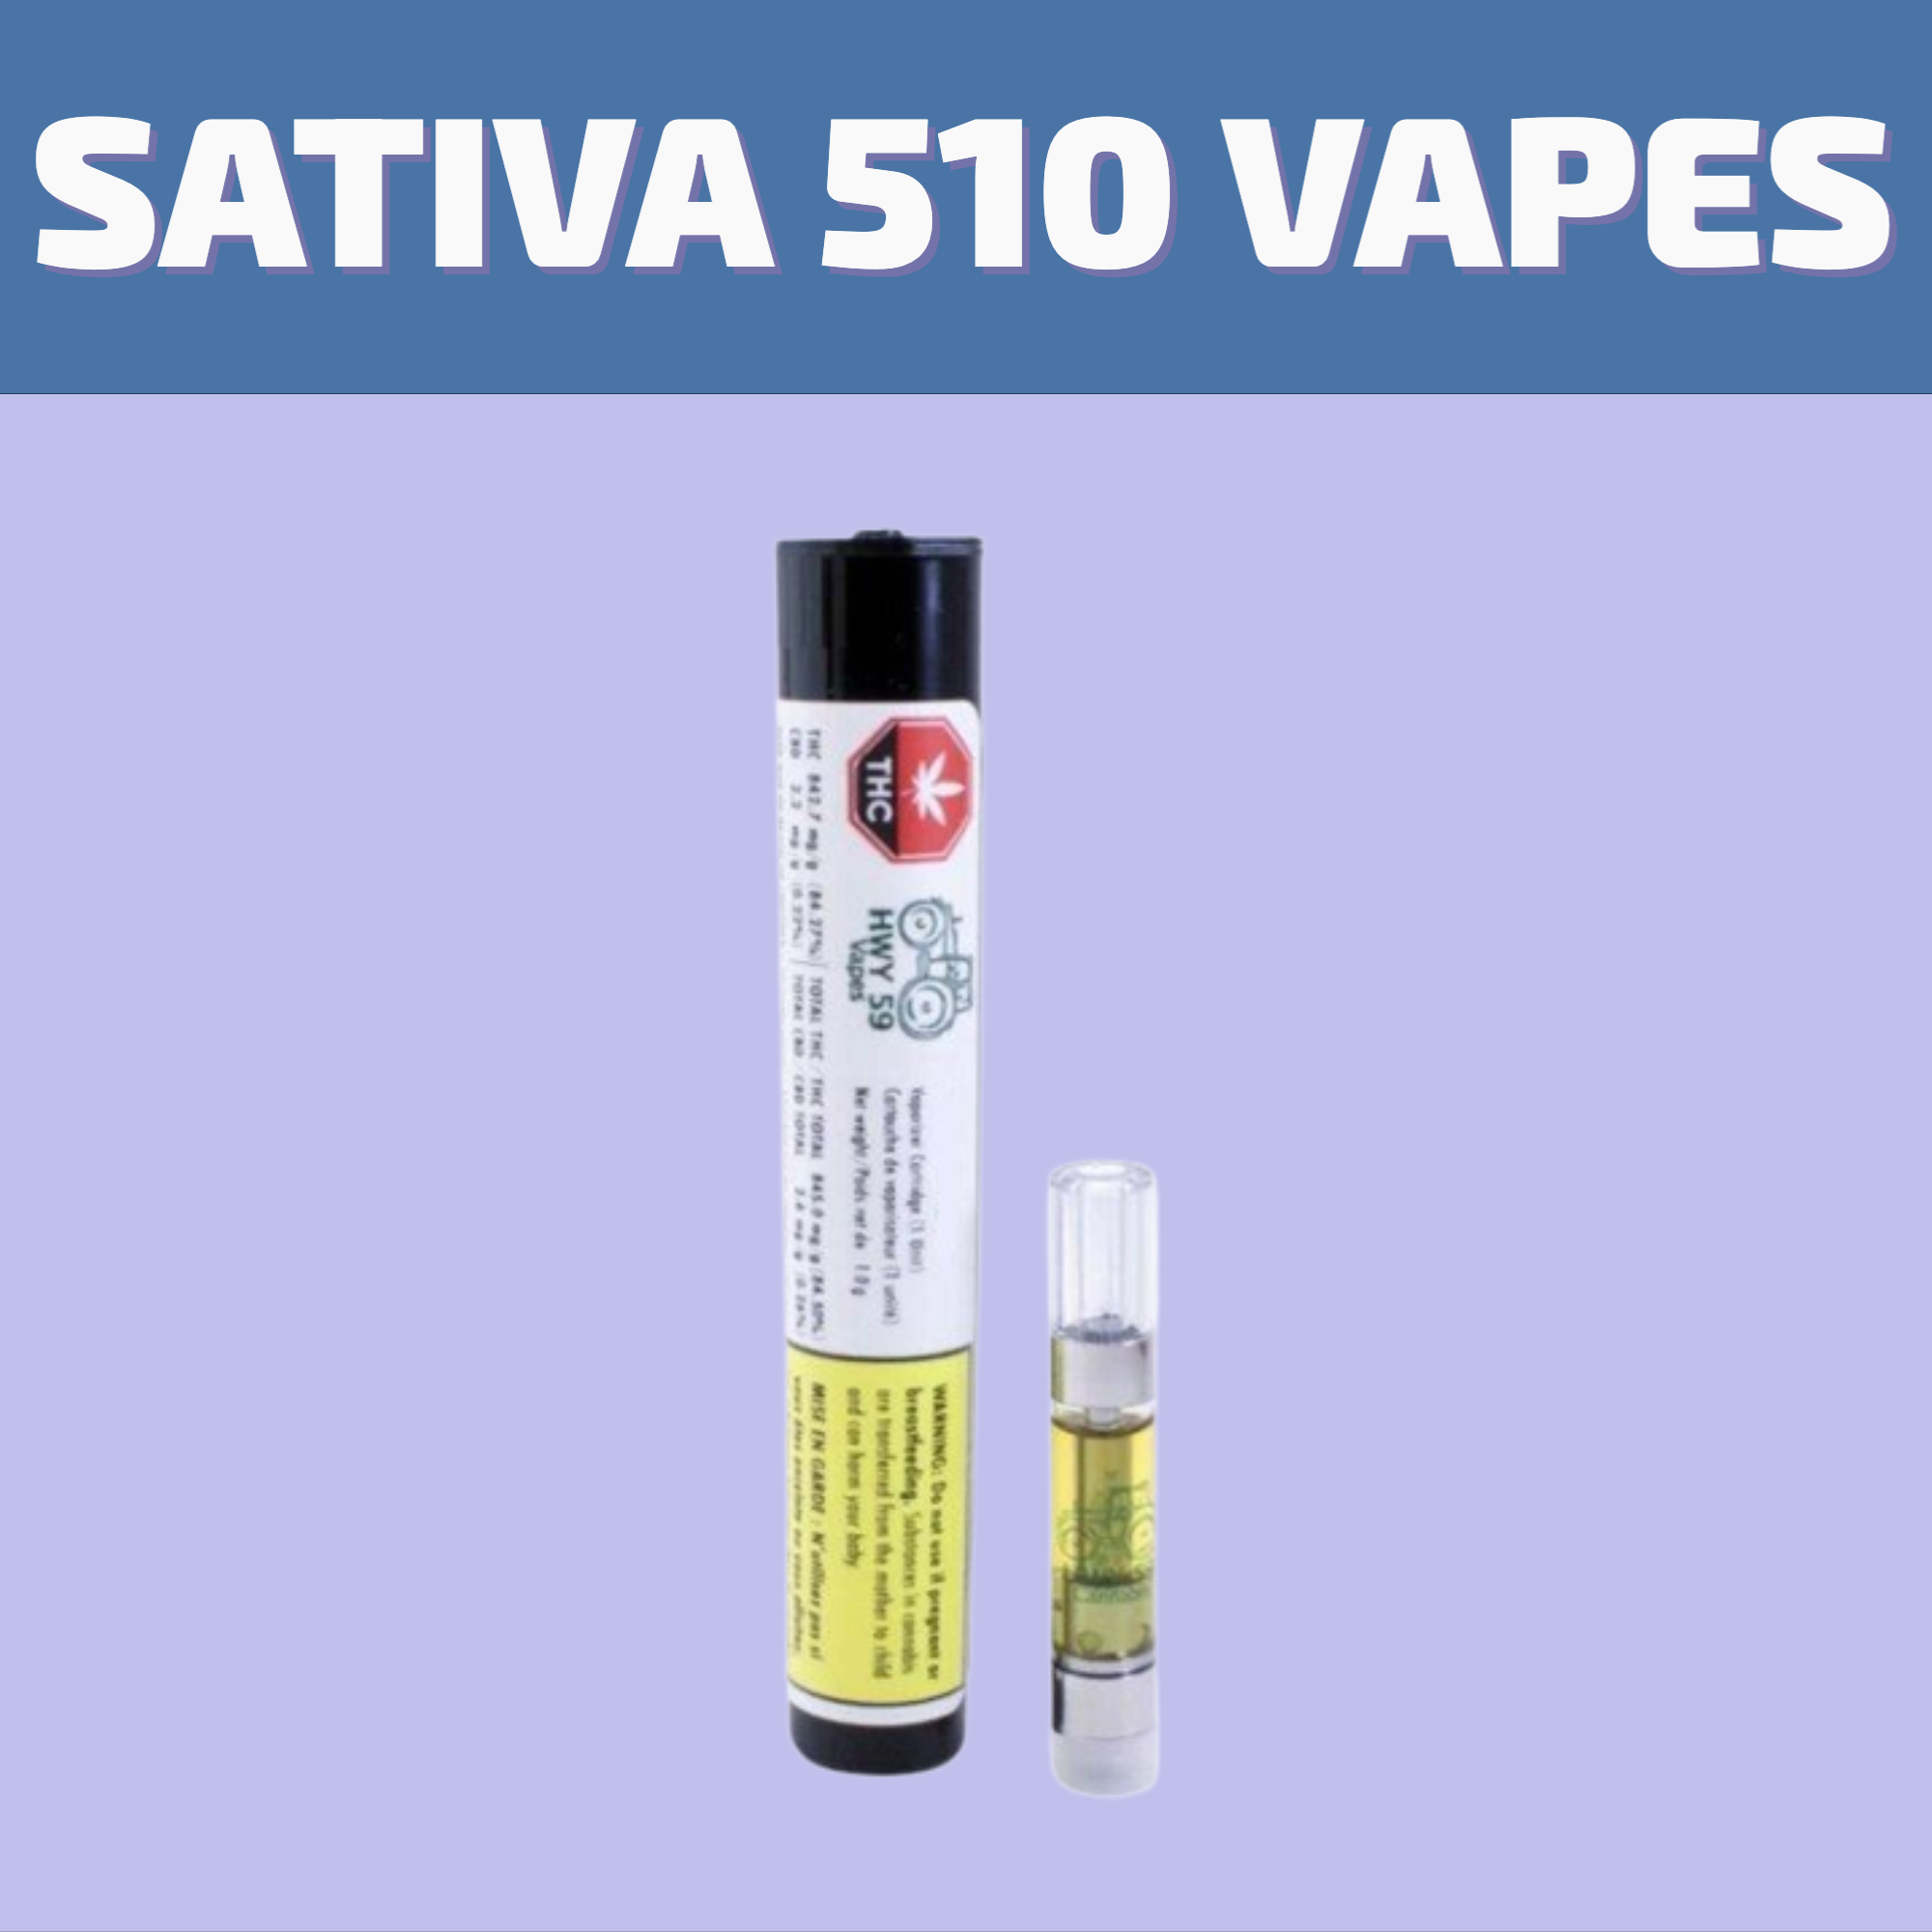 Order Sativa 510 Vape Cartridges and 510 Vape Batteries online for same day delivery in Winnipeg or visit our cannabis store on 580 Academy Road. 